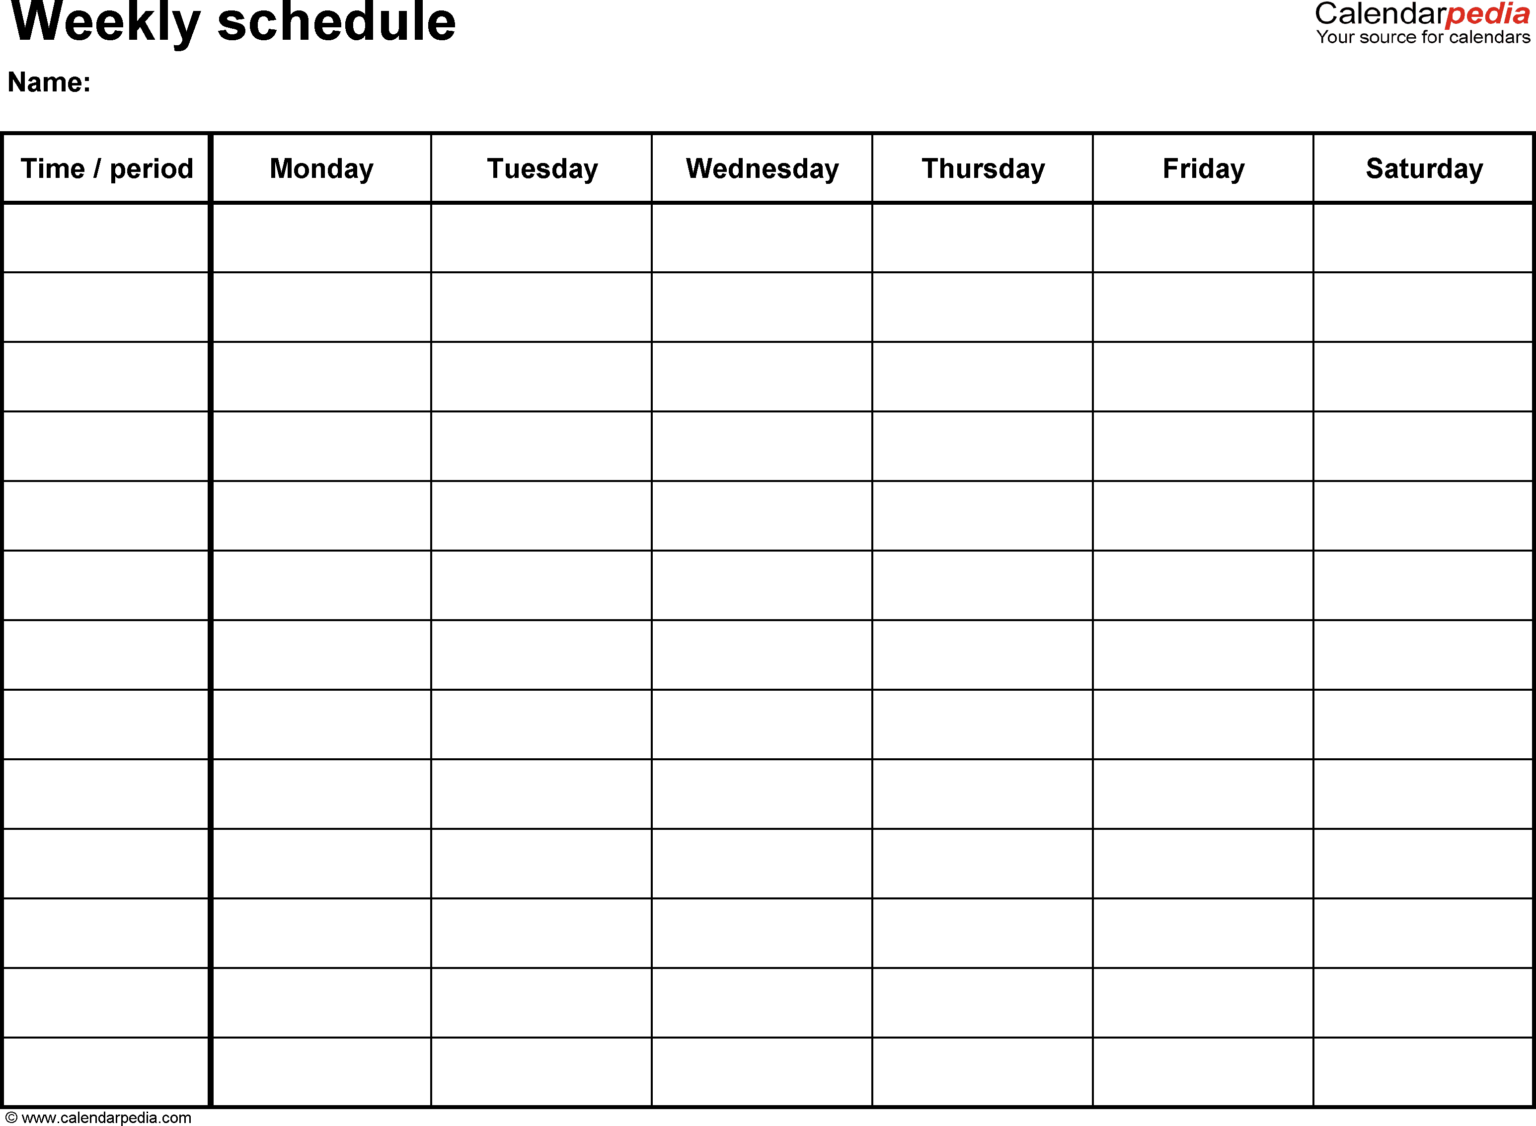 free-weekly-schedule-templates-for-word-18-templates-within-work-plan